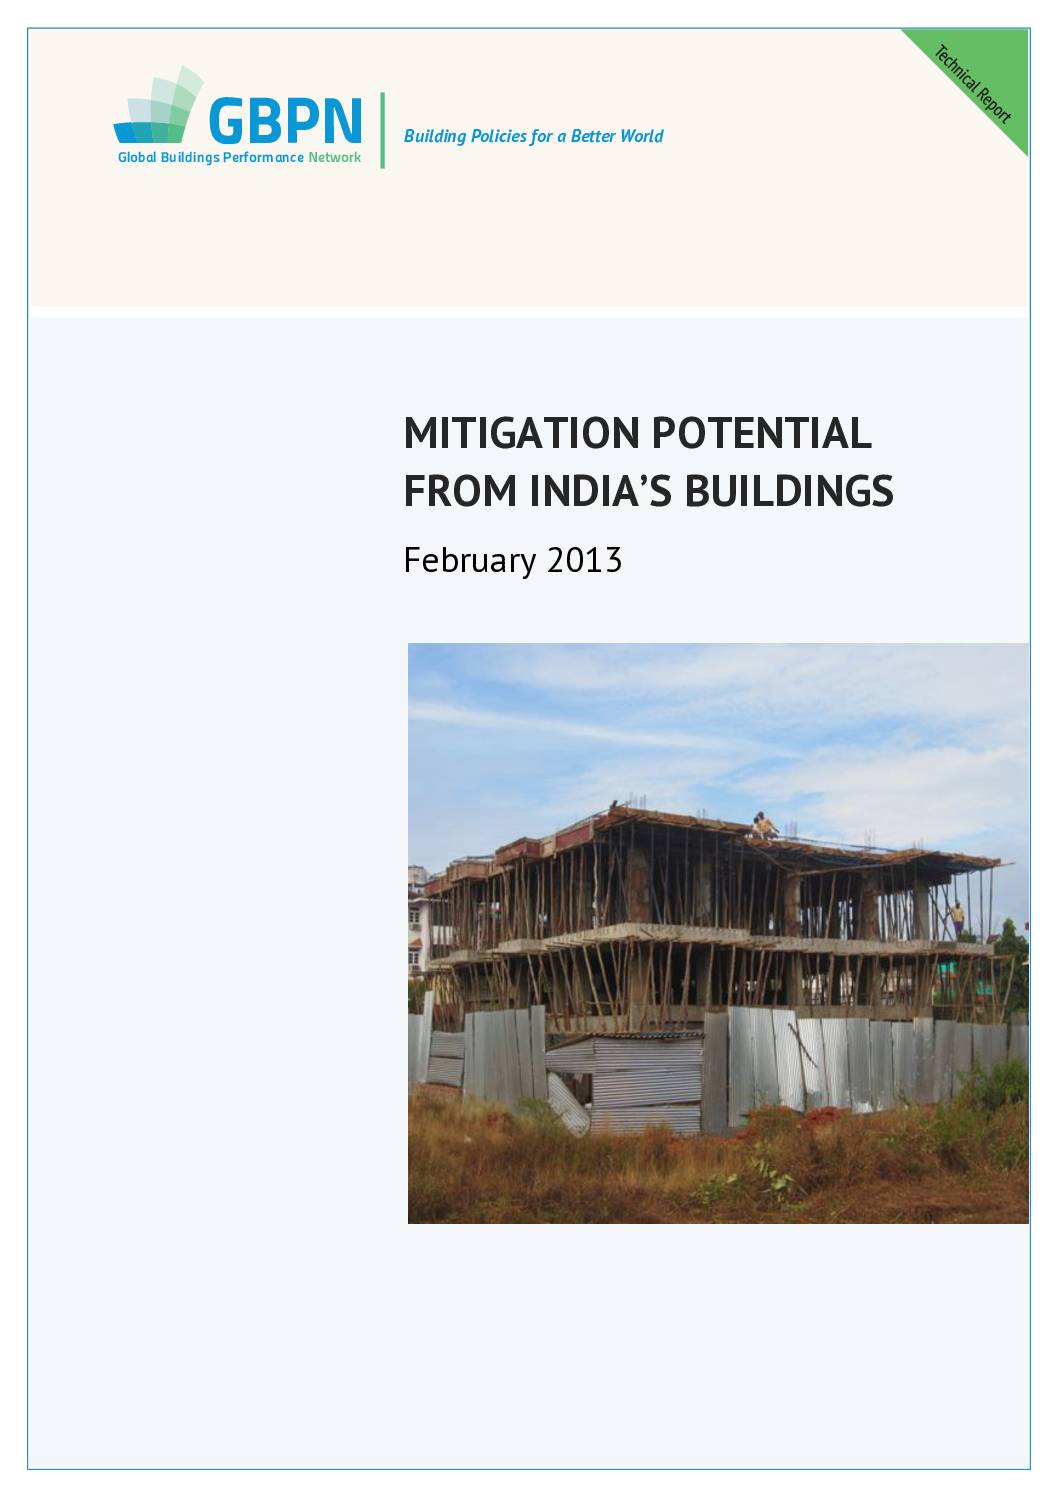 Mitigation Potential from India’s Buildings